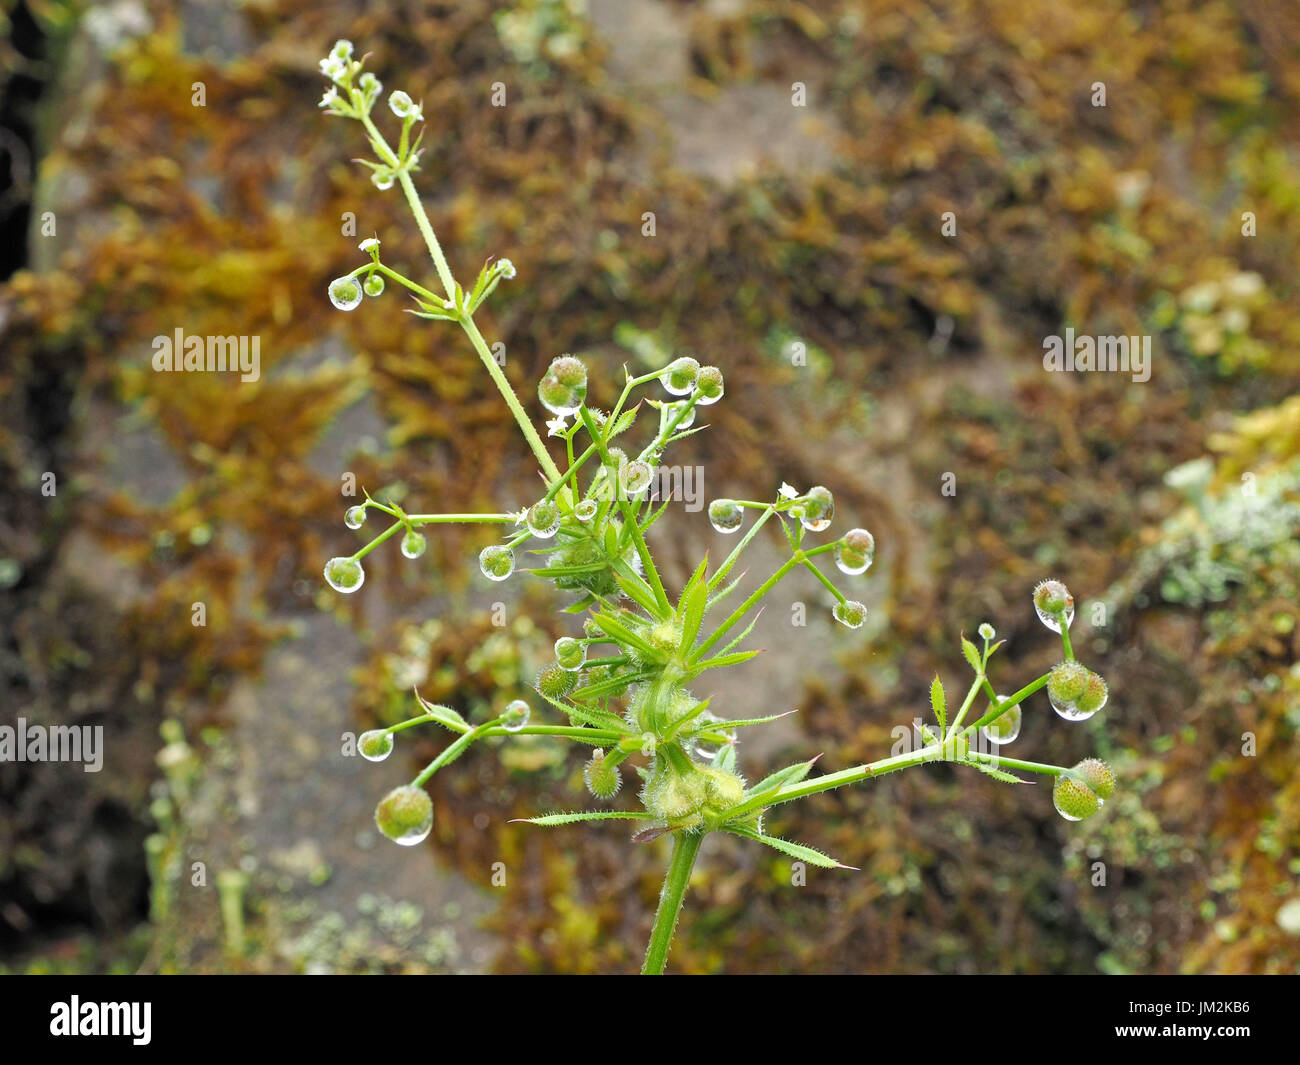 water droplets on seeds of cleavers aka clivers, bedstraw, goosegrass, catchweed, stickyweed, sticky willy, sticky willow stickyjack (Galium aparine) Stock Photo